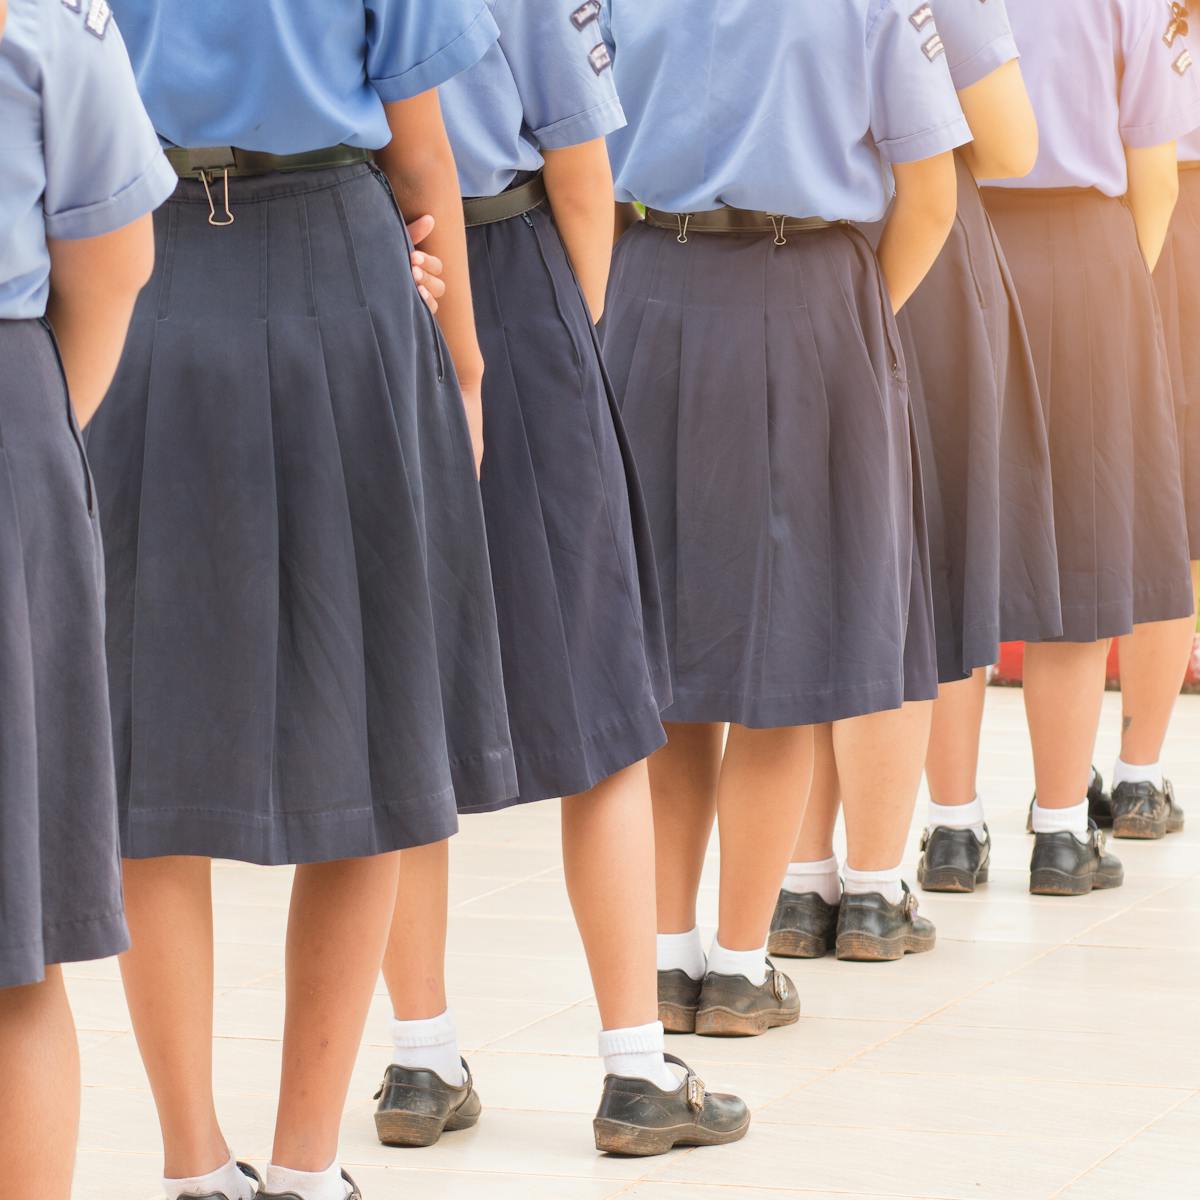 Why do we still make girls wear skirts and dresses as school uniform?